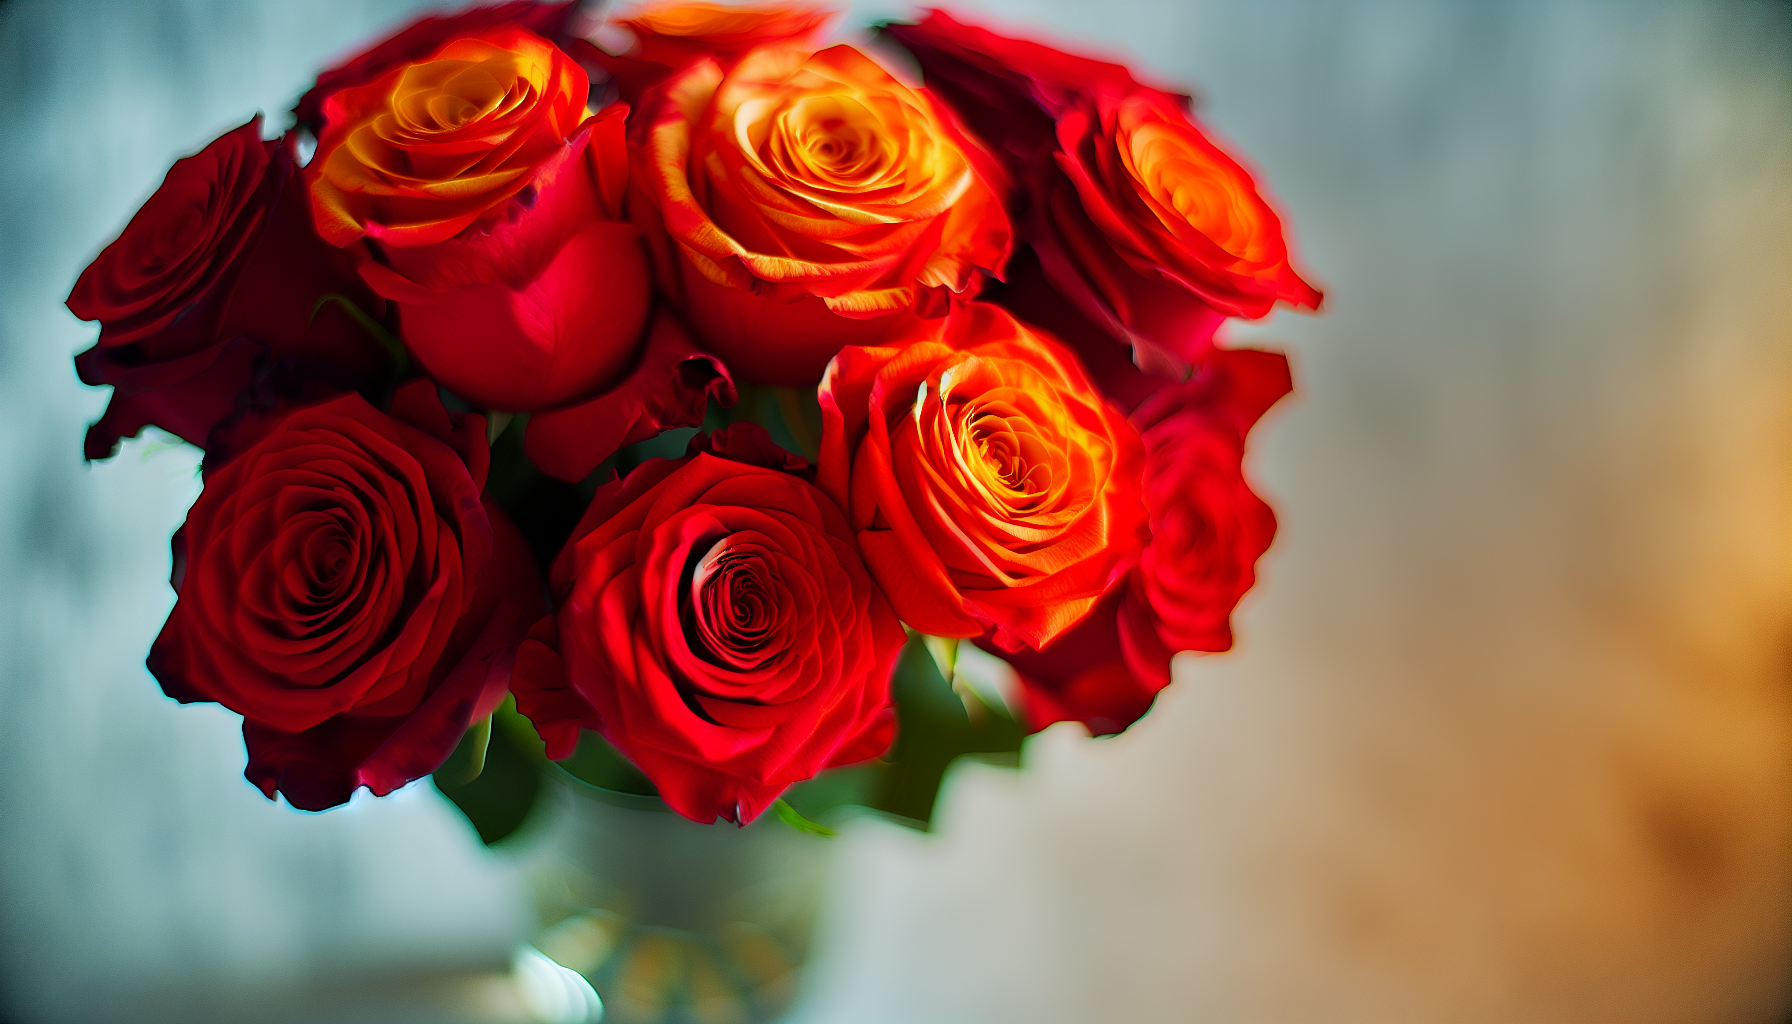 Beautiful bouquet of red and orange roses